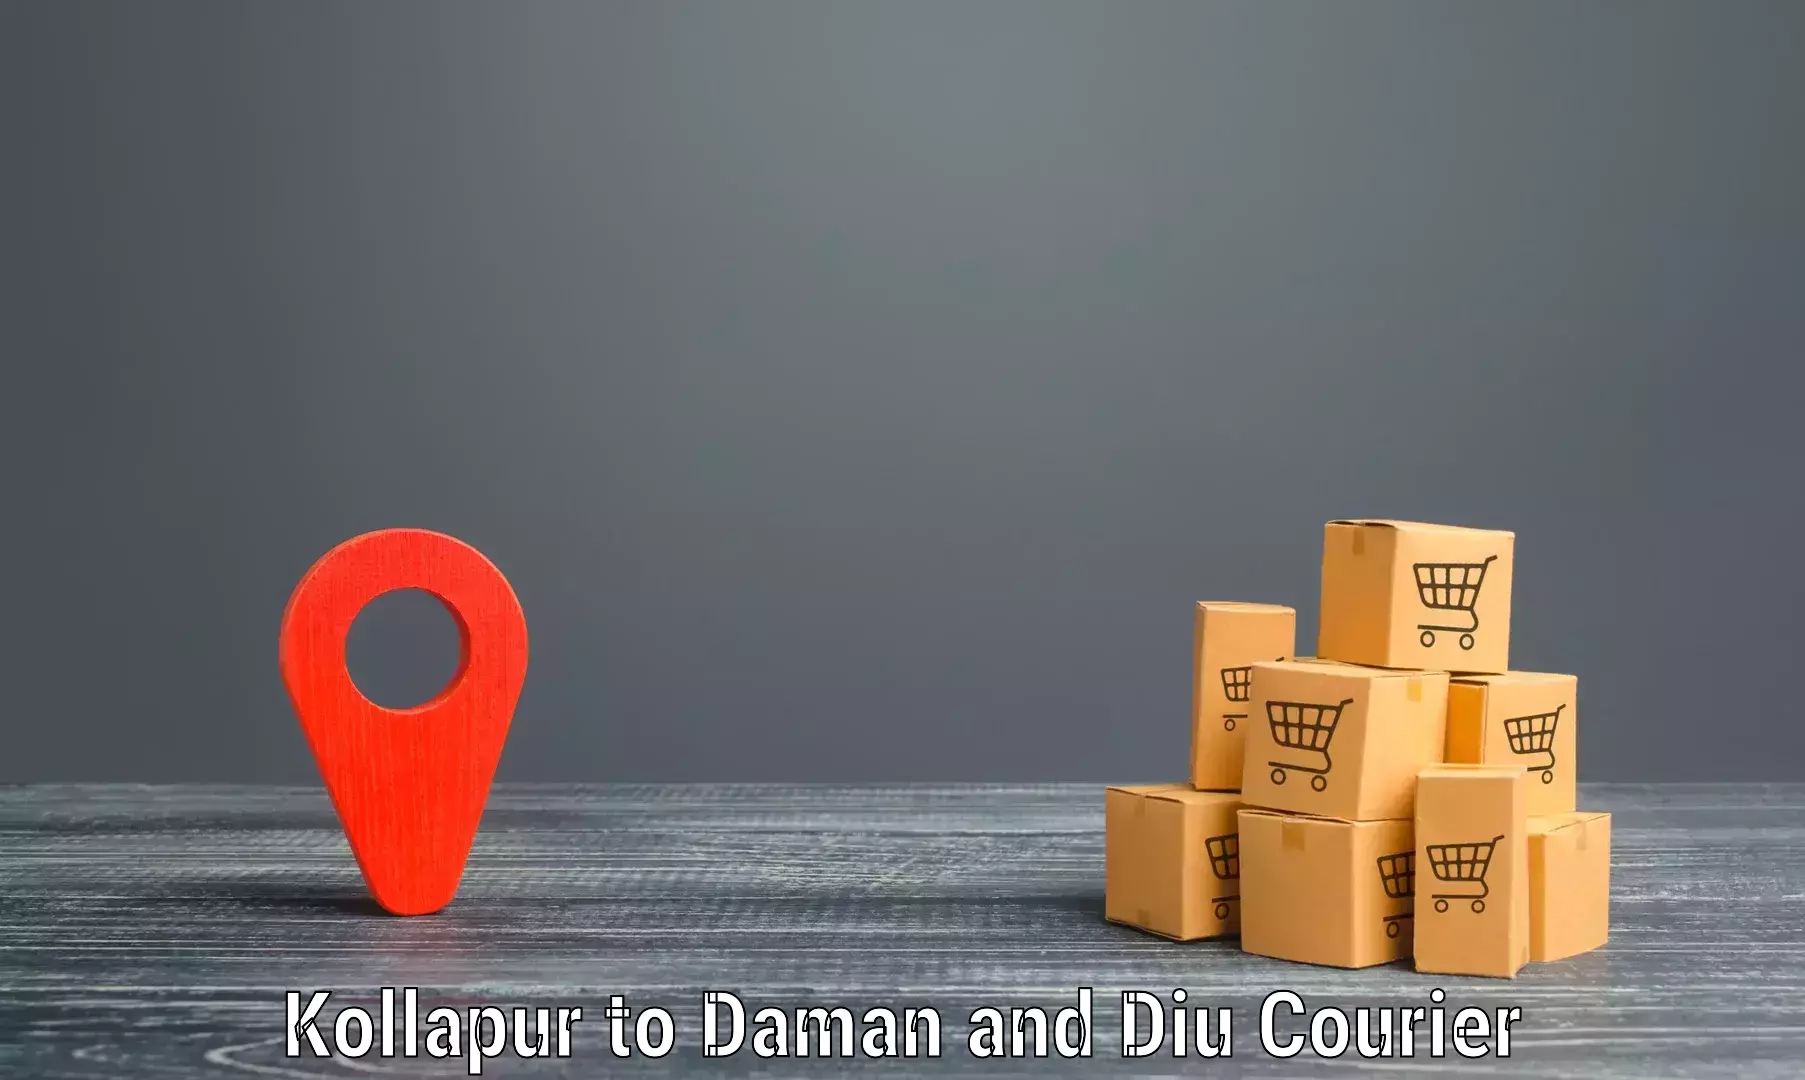 Large package courier Kollapur to Diu